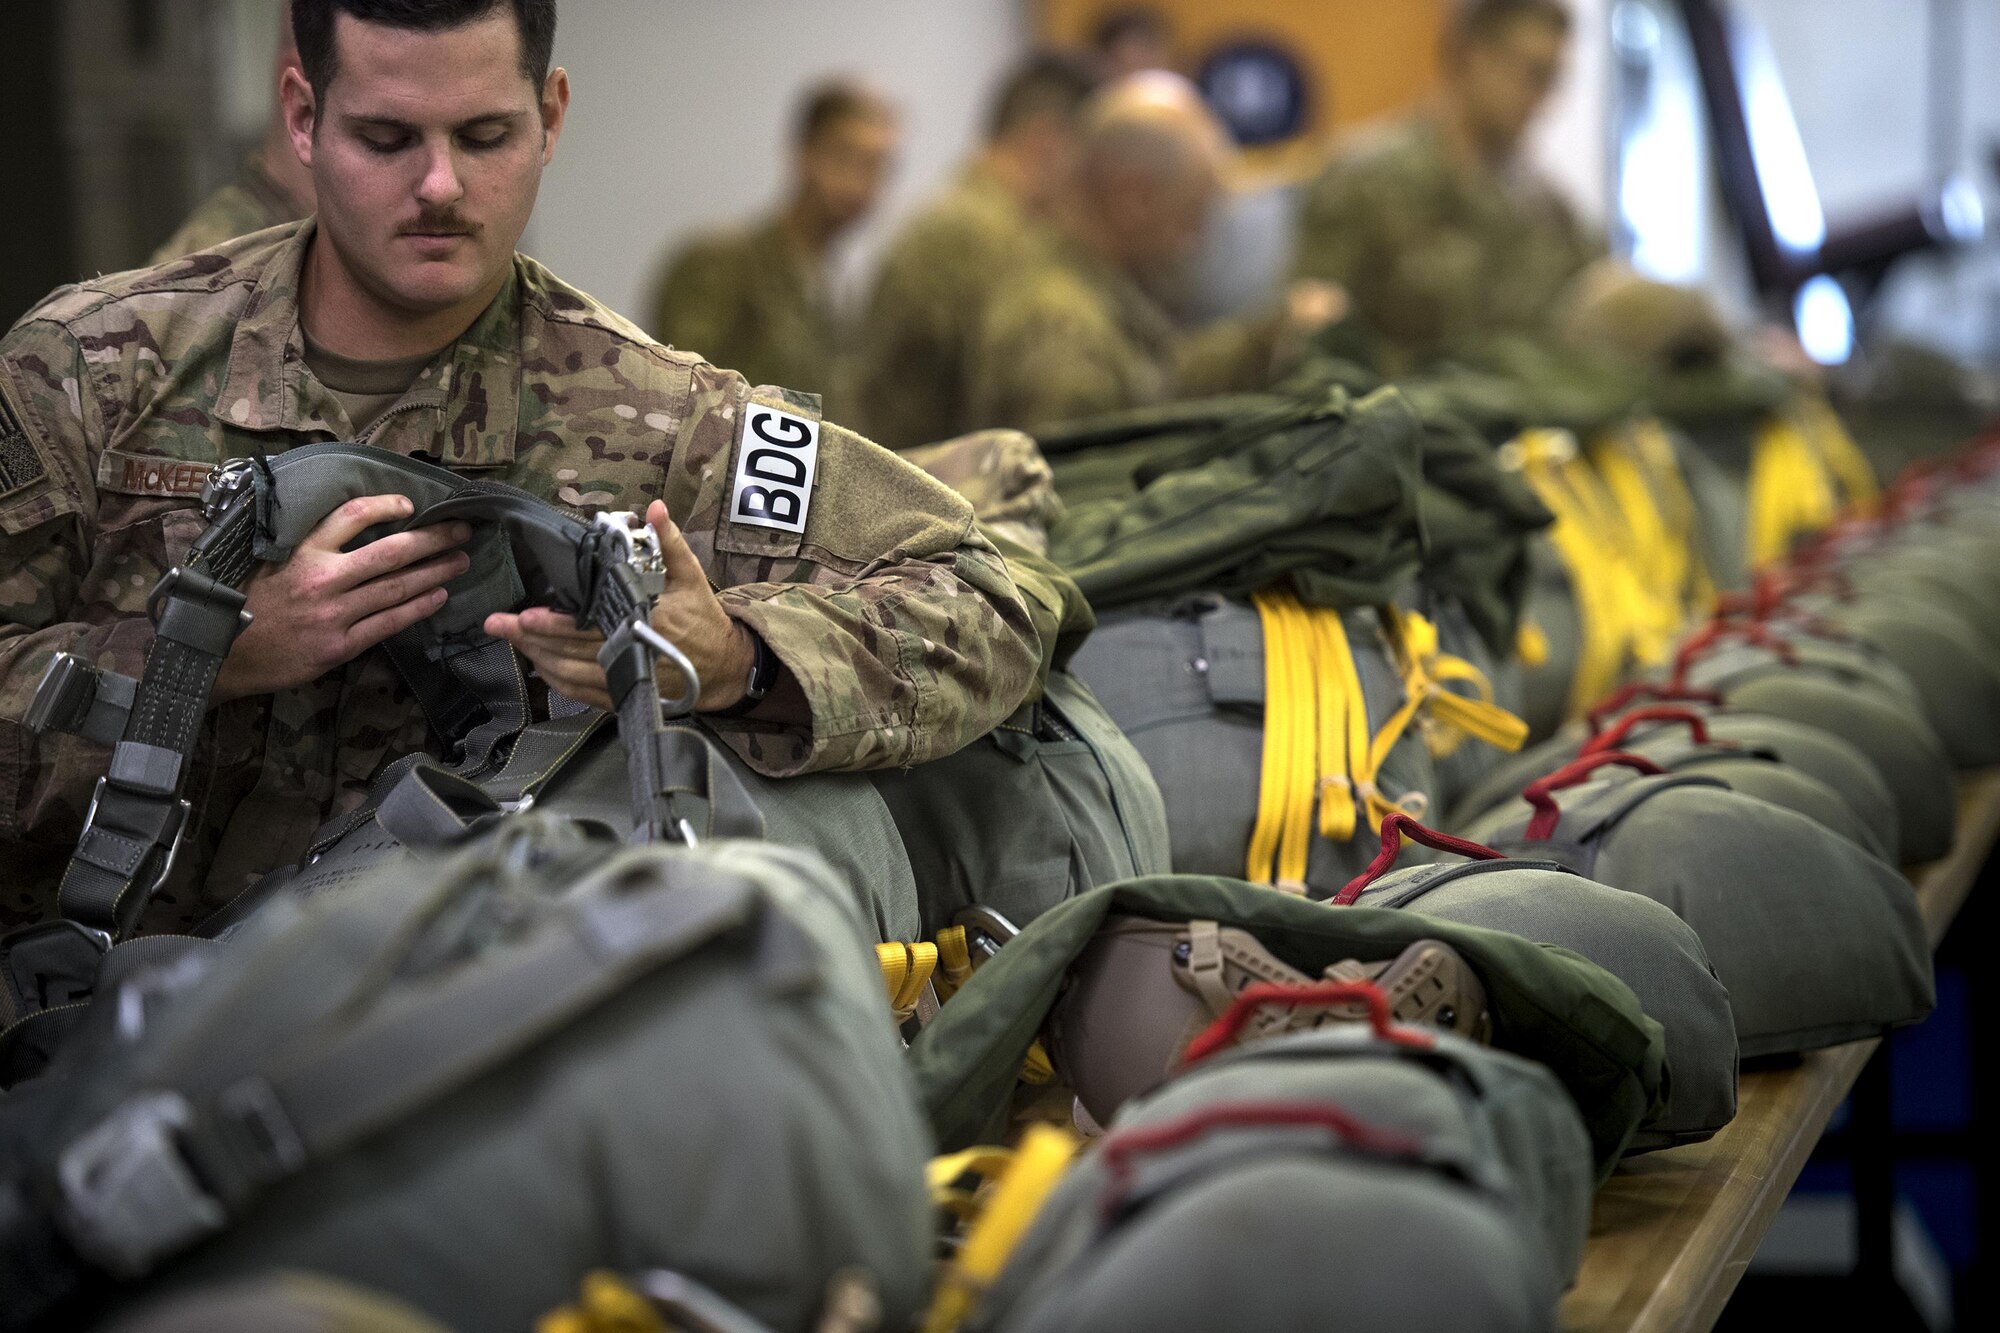 U.S. Air Force Senior Airman Nicholas McKeehan, 823d Base Defense Squadron, dons a parachute prior to participating in a static-line jump, Sept. 16, 2016, at Moody Air Force Base, Ga. Prior to each jump, a jumpmaster conducts an inspection to ensure each jumper’s parachute is properly prepared. (U.S. Air Force photo by Staff Sgt. Ryan Callaghan)